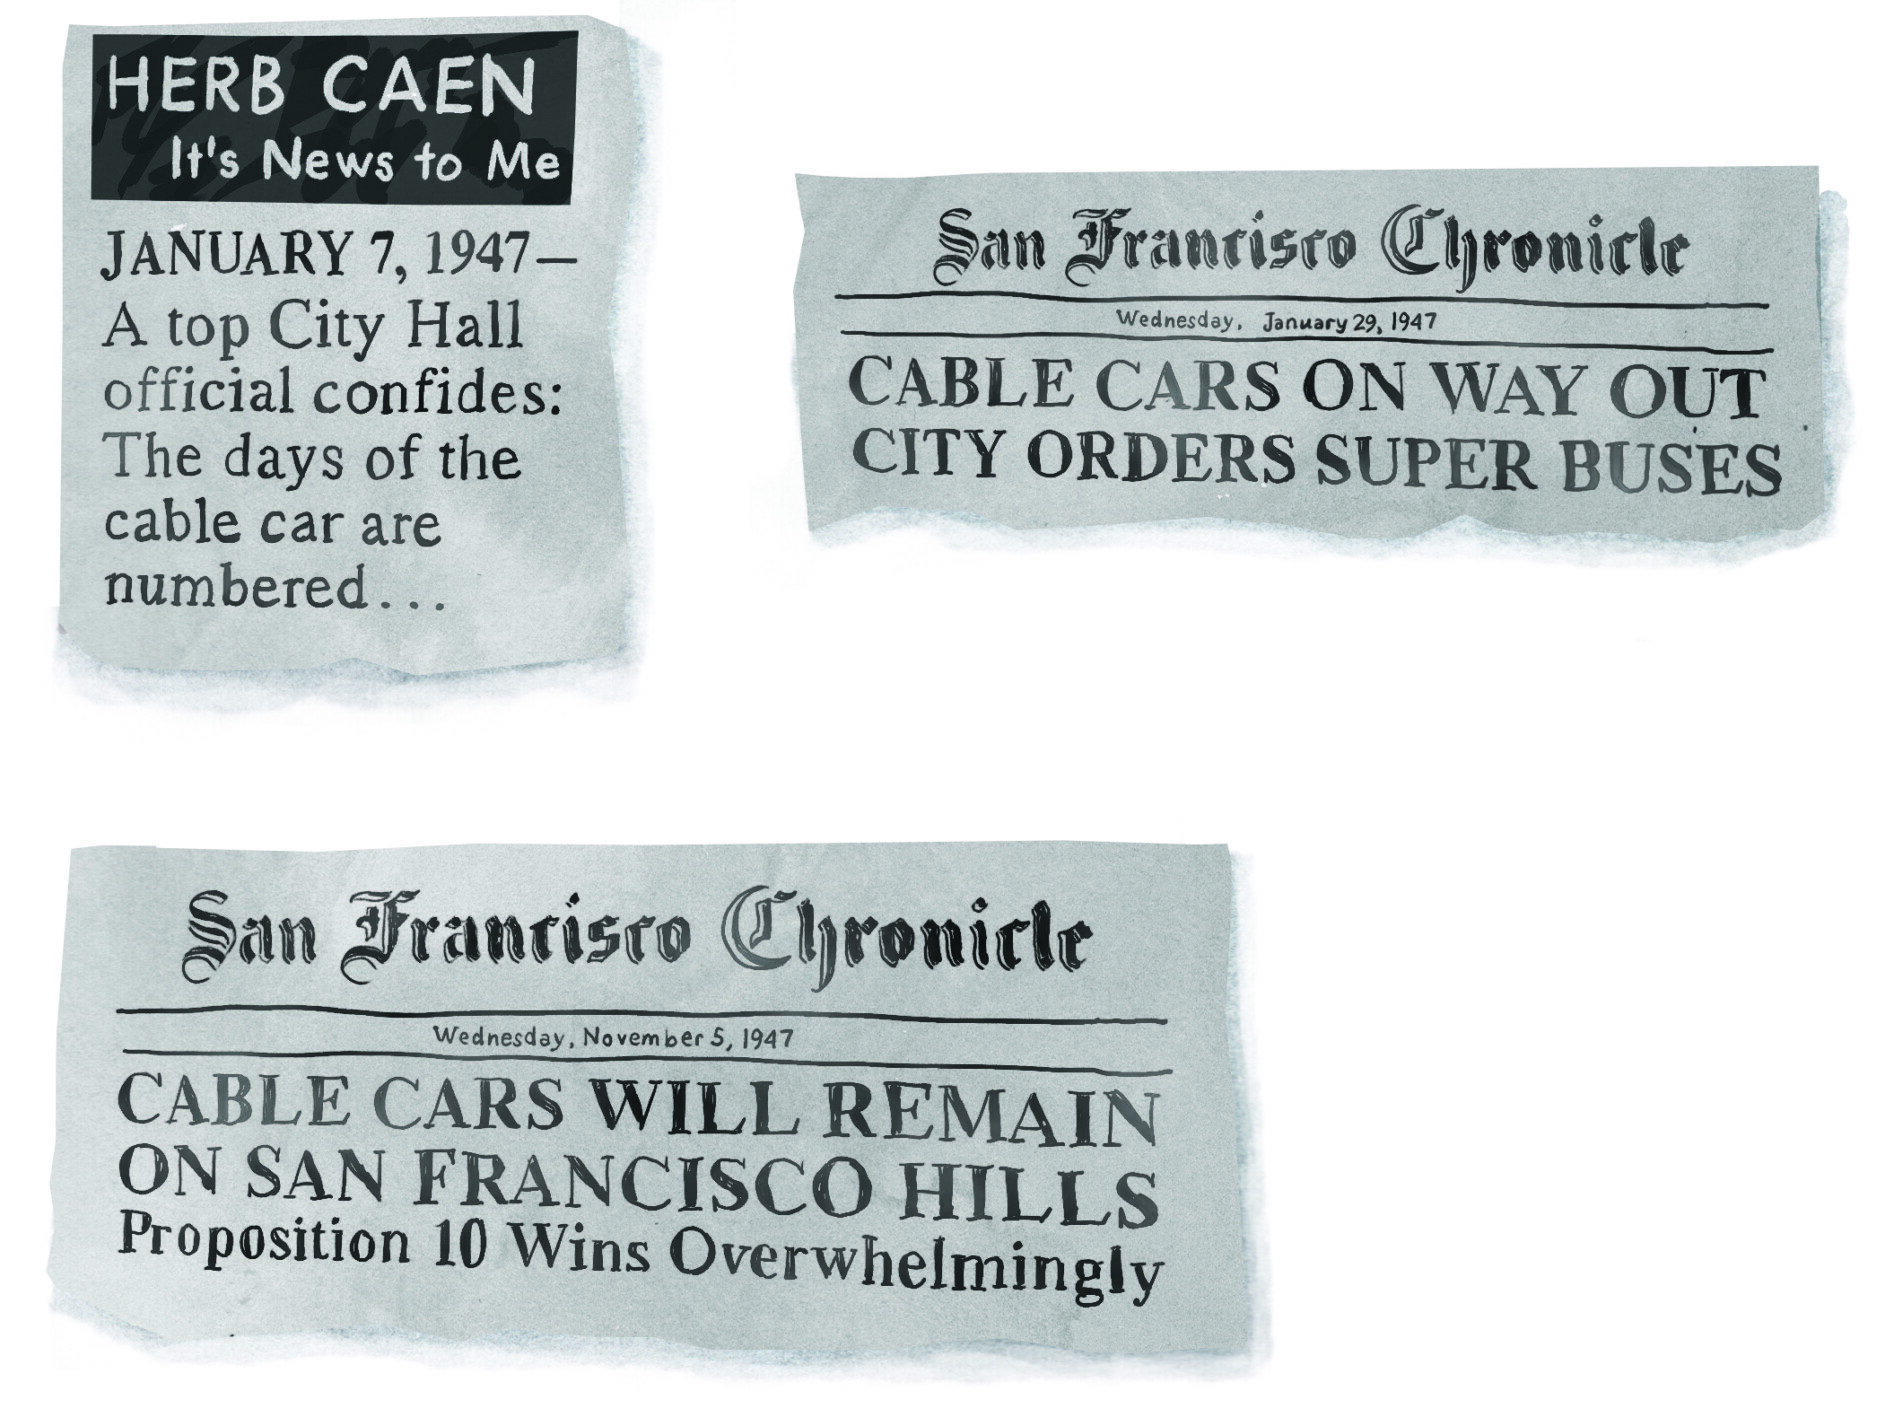 Illustrations of newspaper clippings about the cable cars.